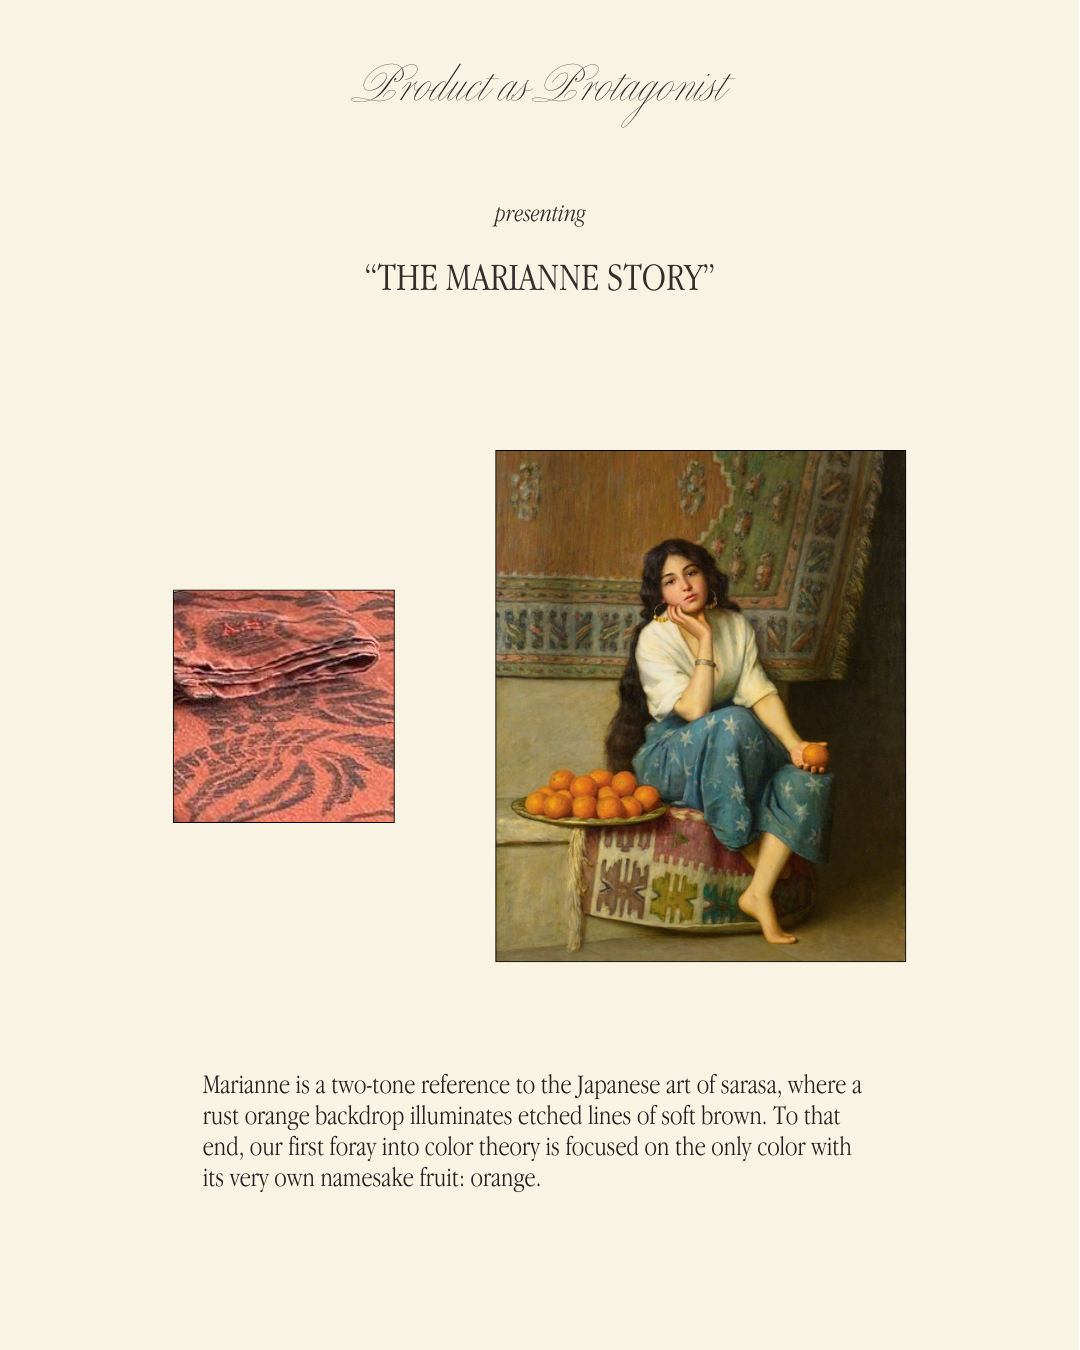 PRODUCT AS PROTAGONIST: The Marianne Story